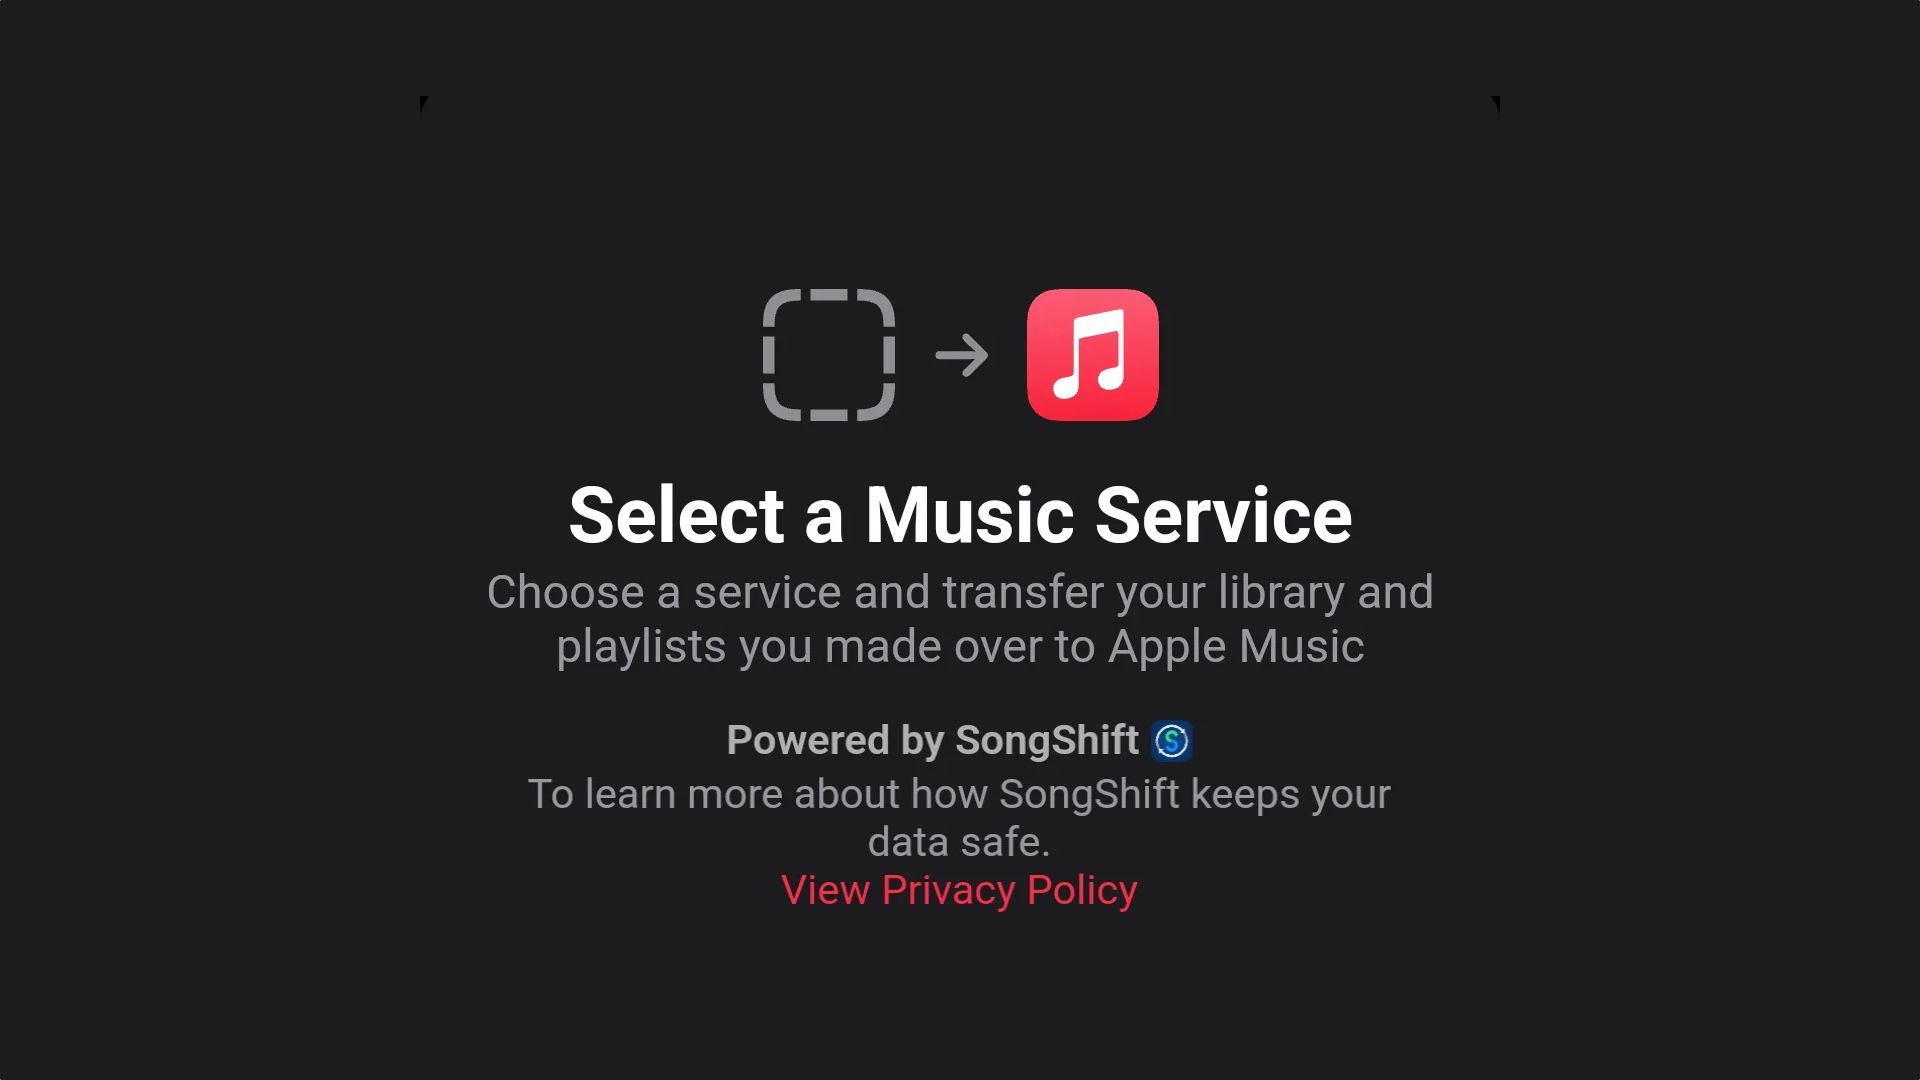 Apple Music Introduces SongShift Integration for Seamless Music Transfer Between Streaming Services